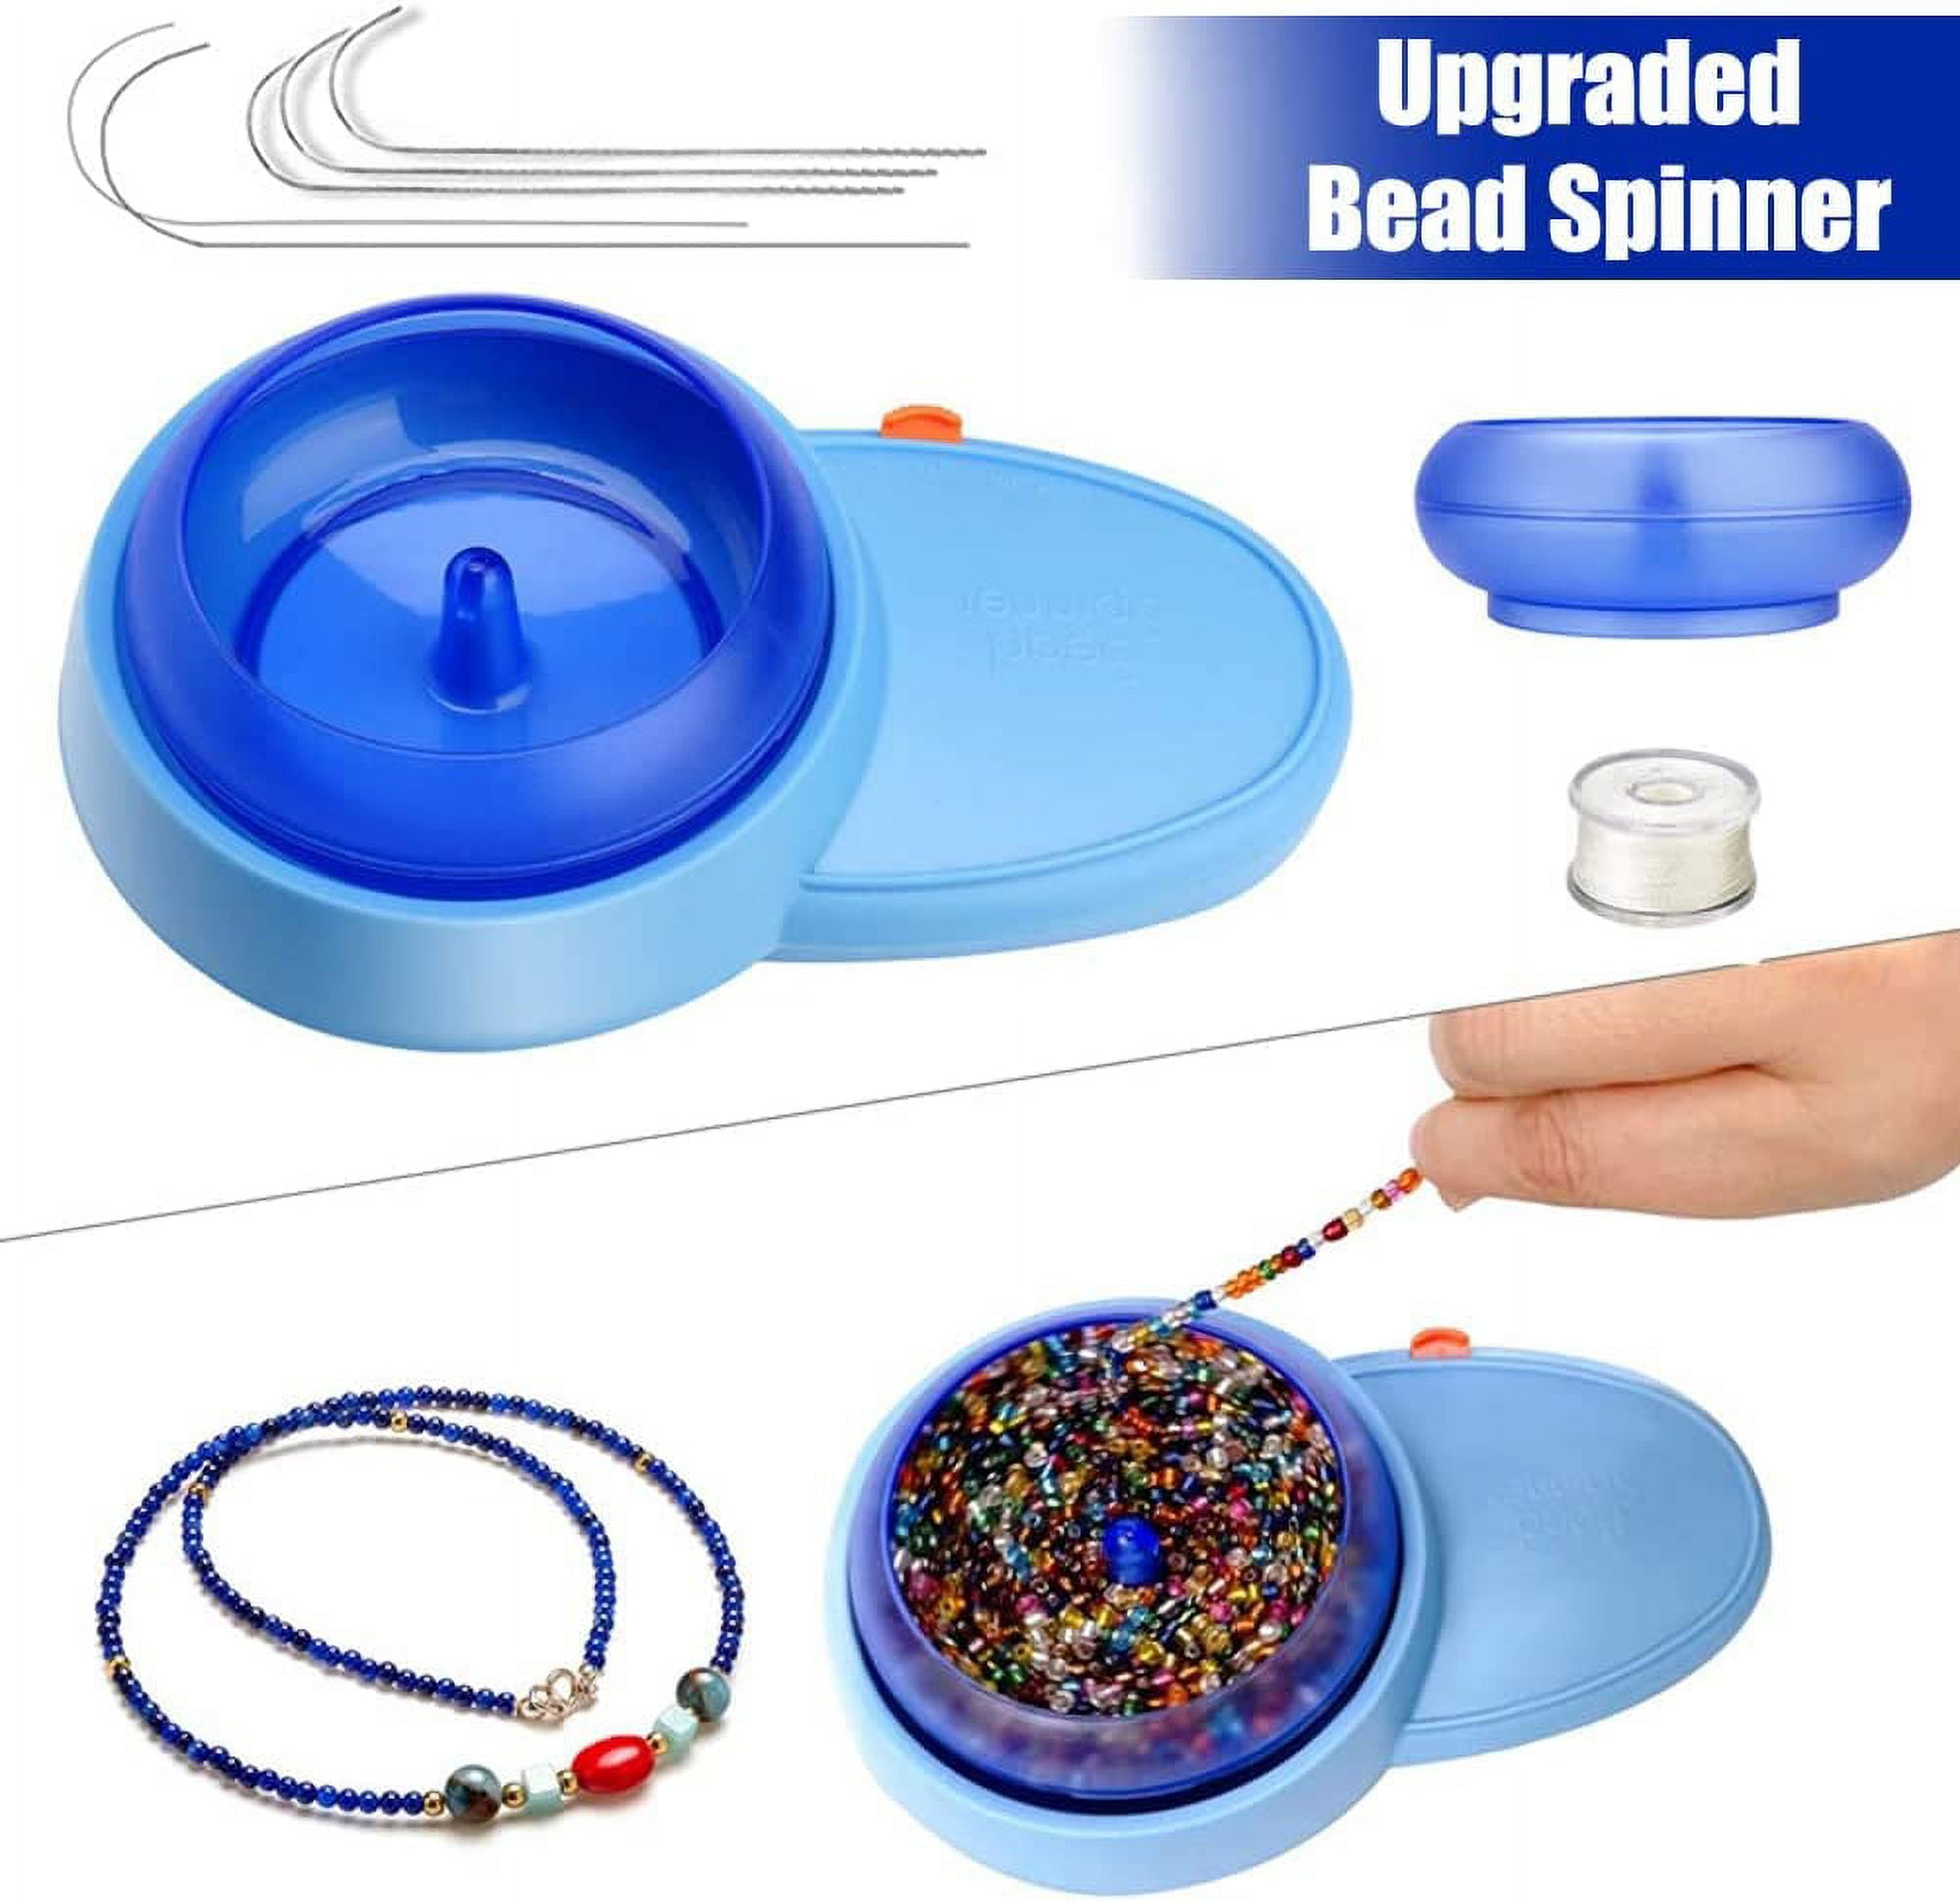  Electric Bead Spinner for Jewelry Making, Adjustable Speed  Beading Bowl Spinner Kit with 3 Large Eye Curved Needles and 2 Elastic  String for DIY Making Waist Beads, Bracelets or Necklaces